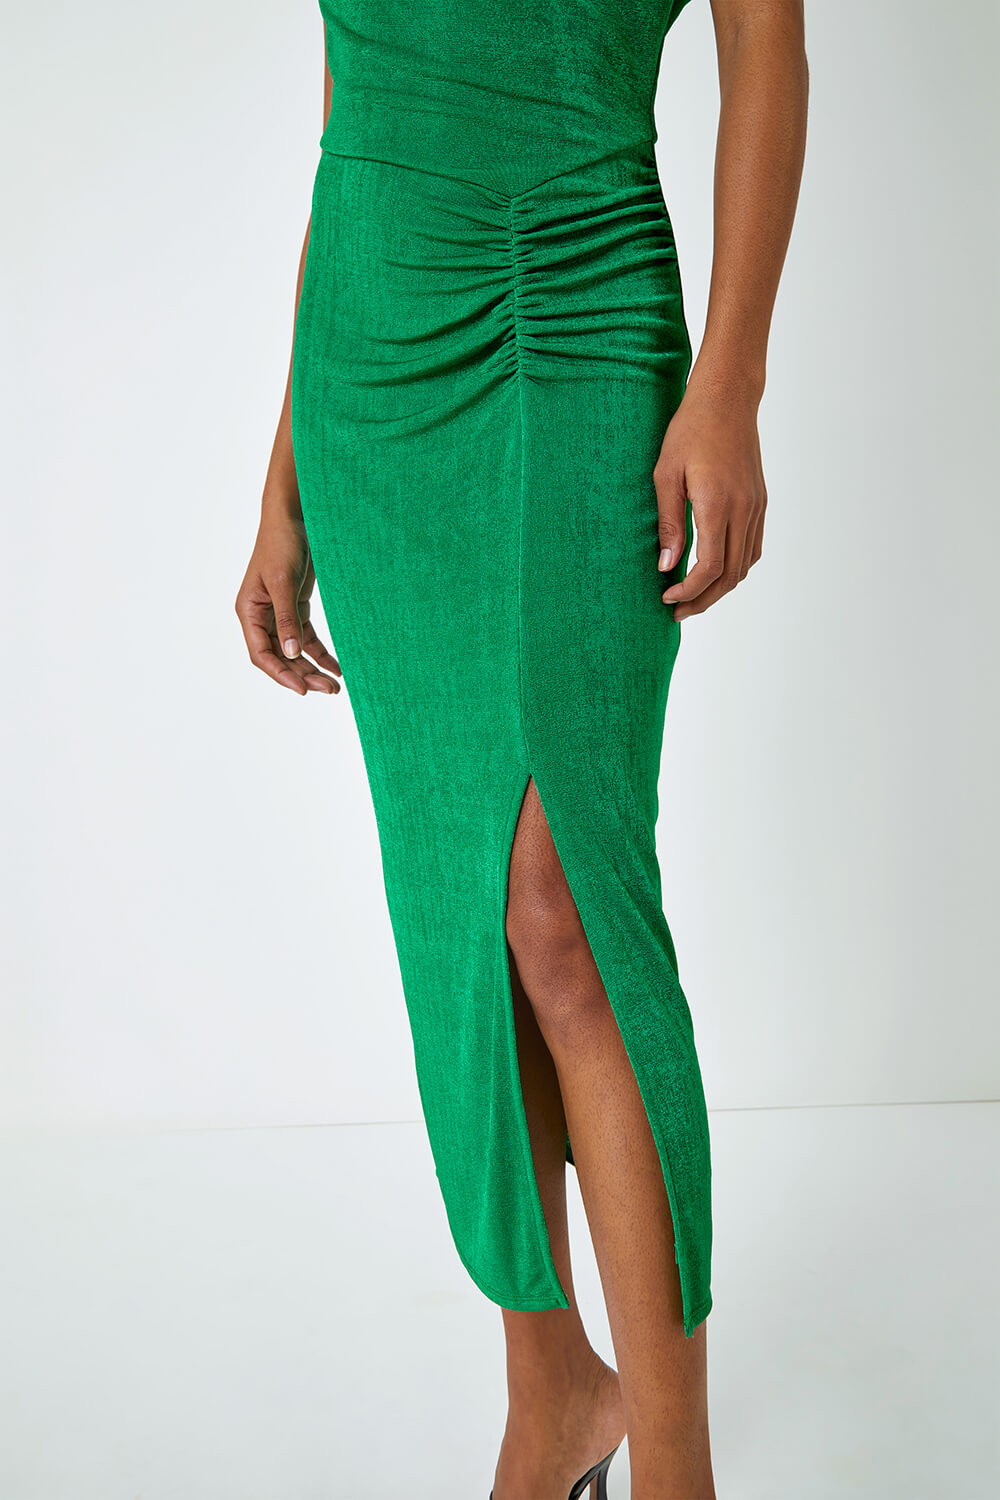 Green Cowl Neck Ruched Midi Dress, Image 5 of 5